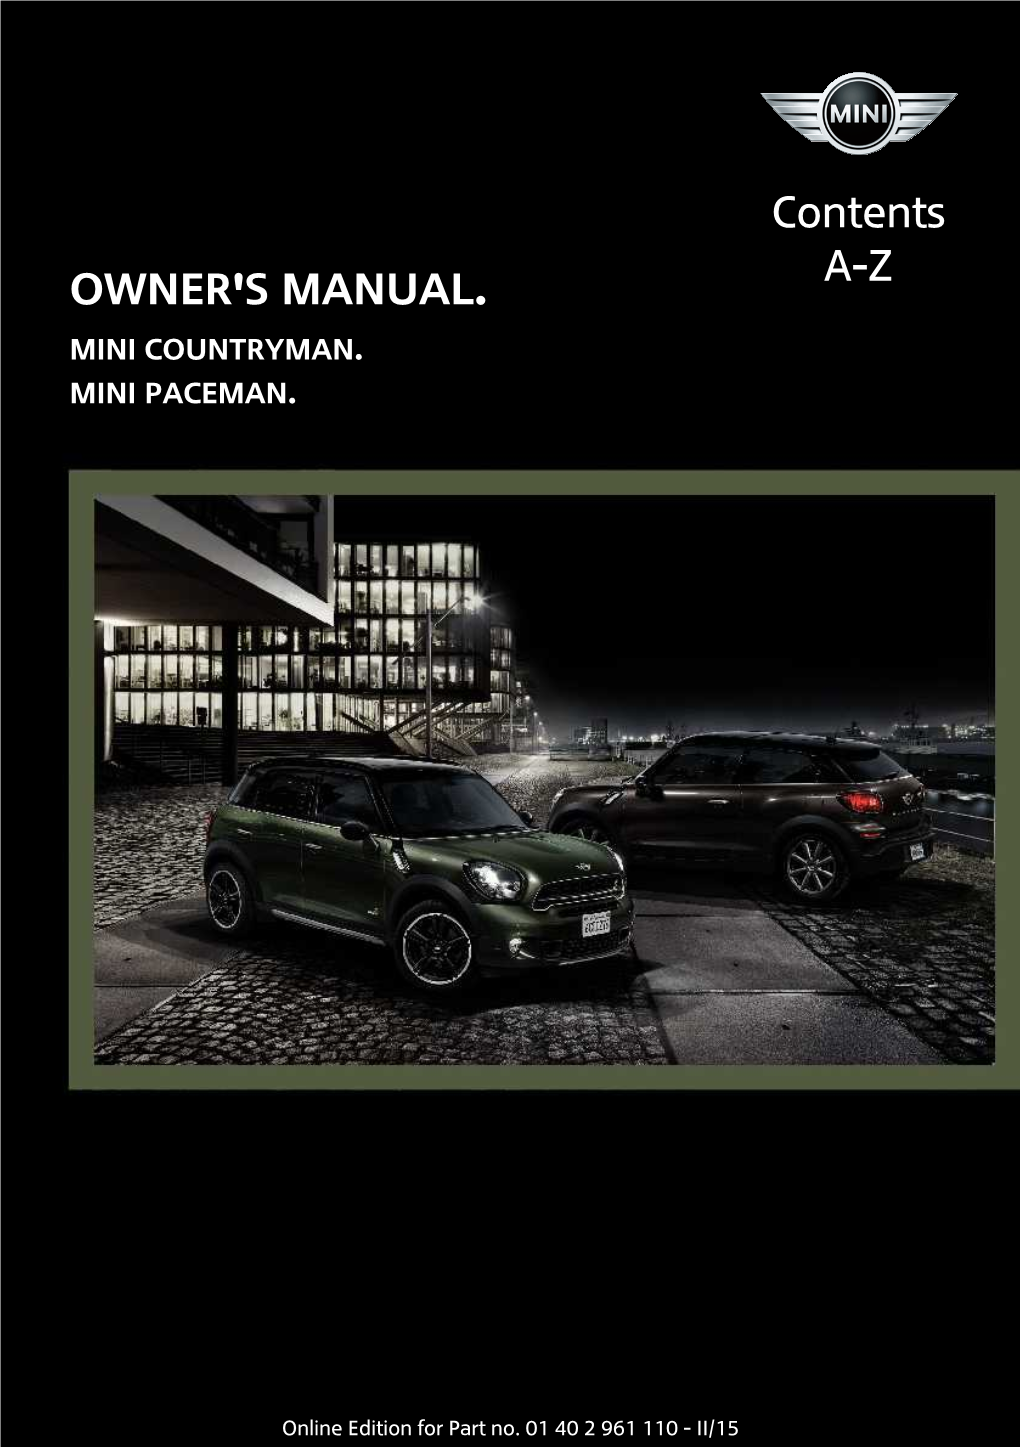 OWNER's MANUAL. Contents